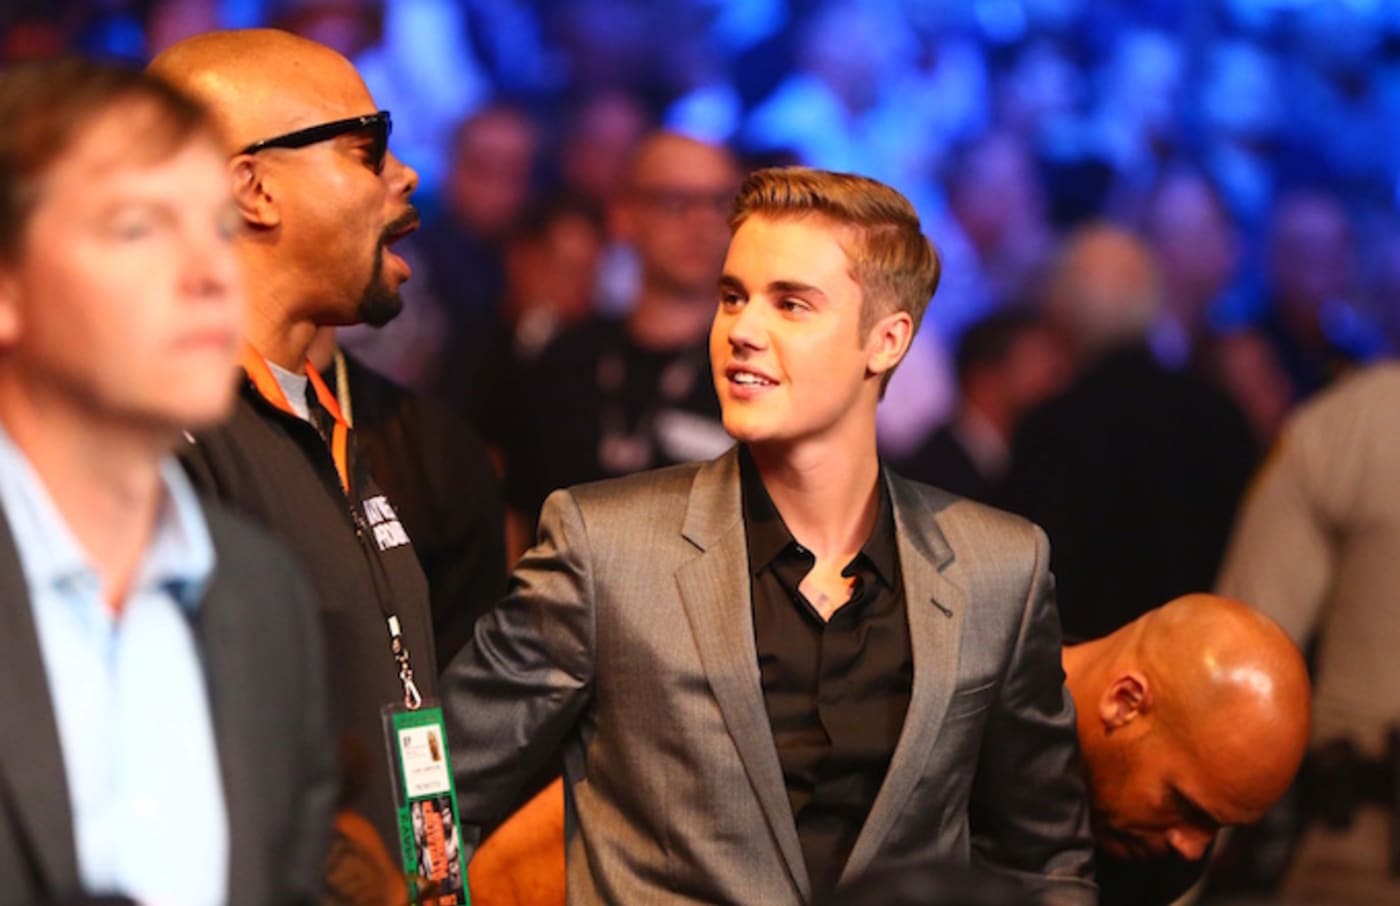 Justin Bieber attends fight between Floyd Mayweather Jr. and Manny Pacquiao.